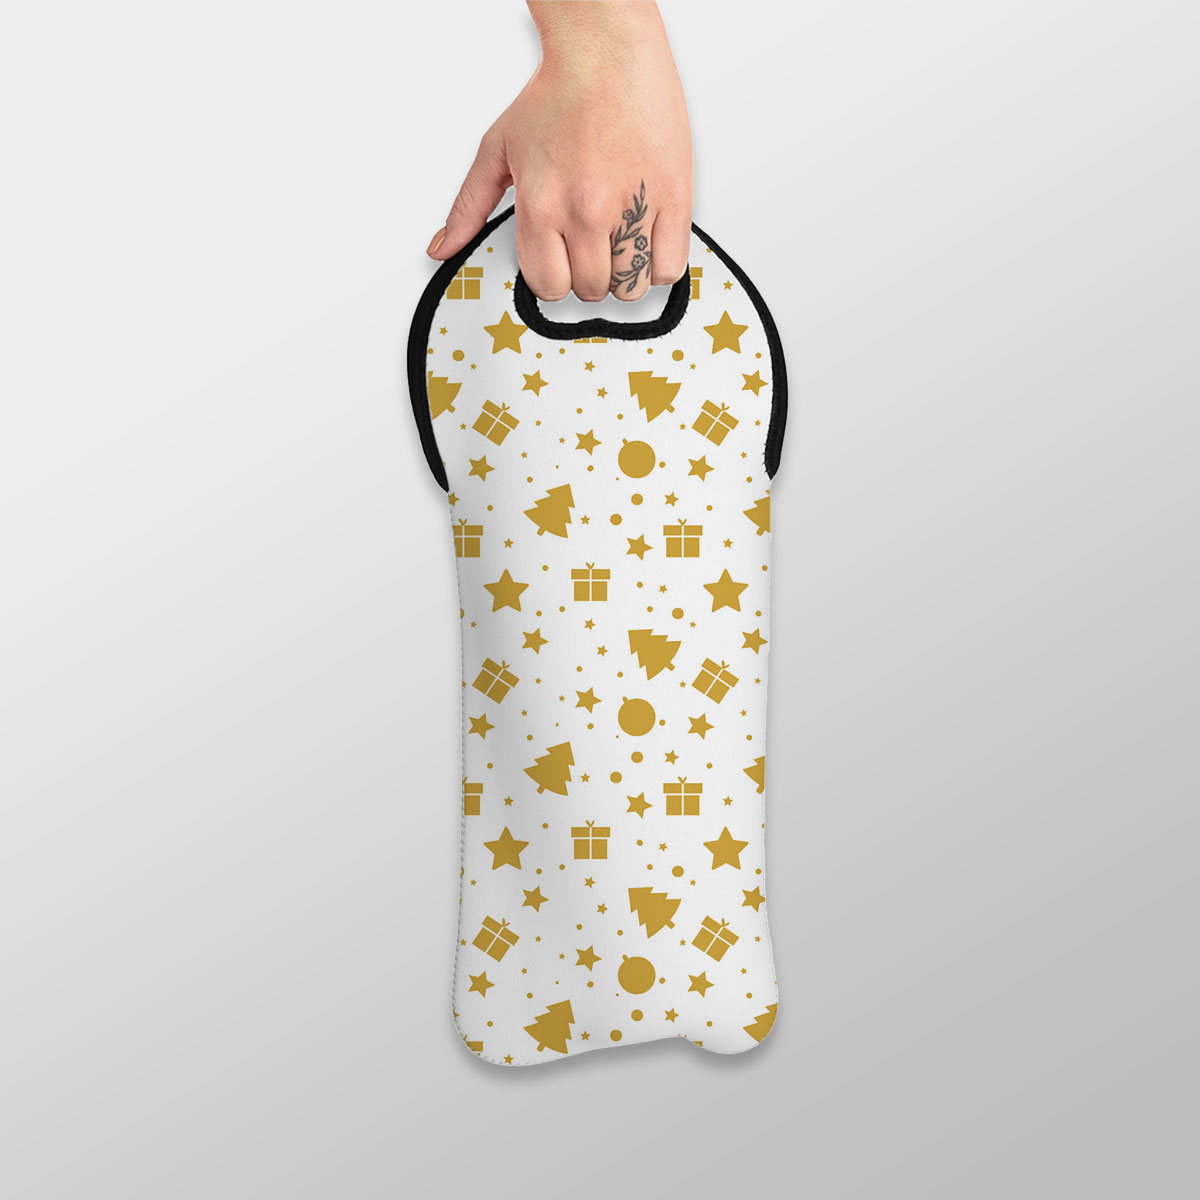 Christmas Gifts, Baudles And Pine Tree Silhouette Filled In Gold Color Pattern Wine Tote Bag